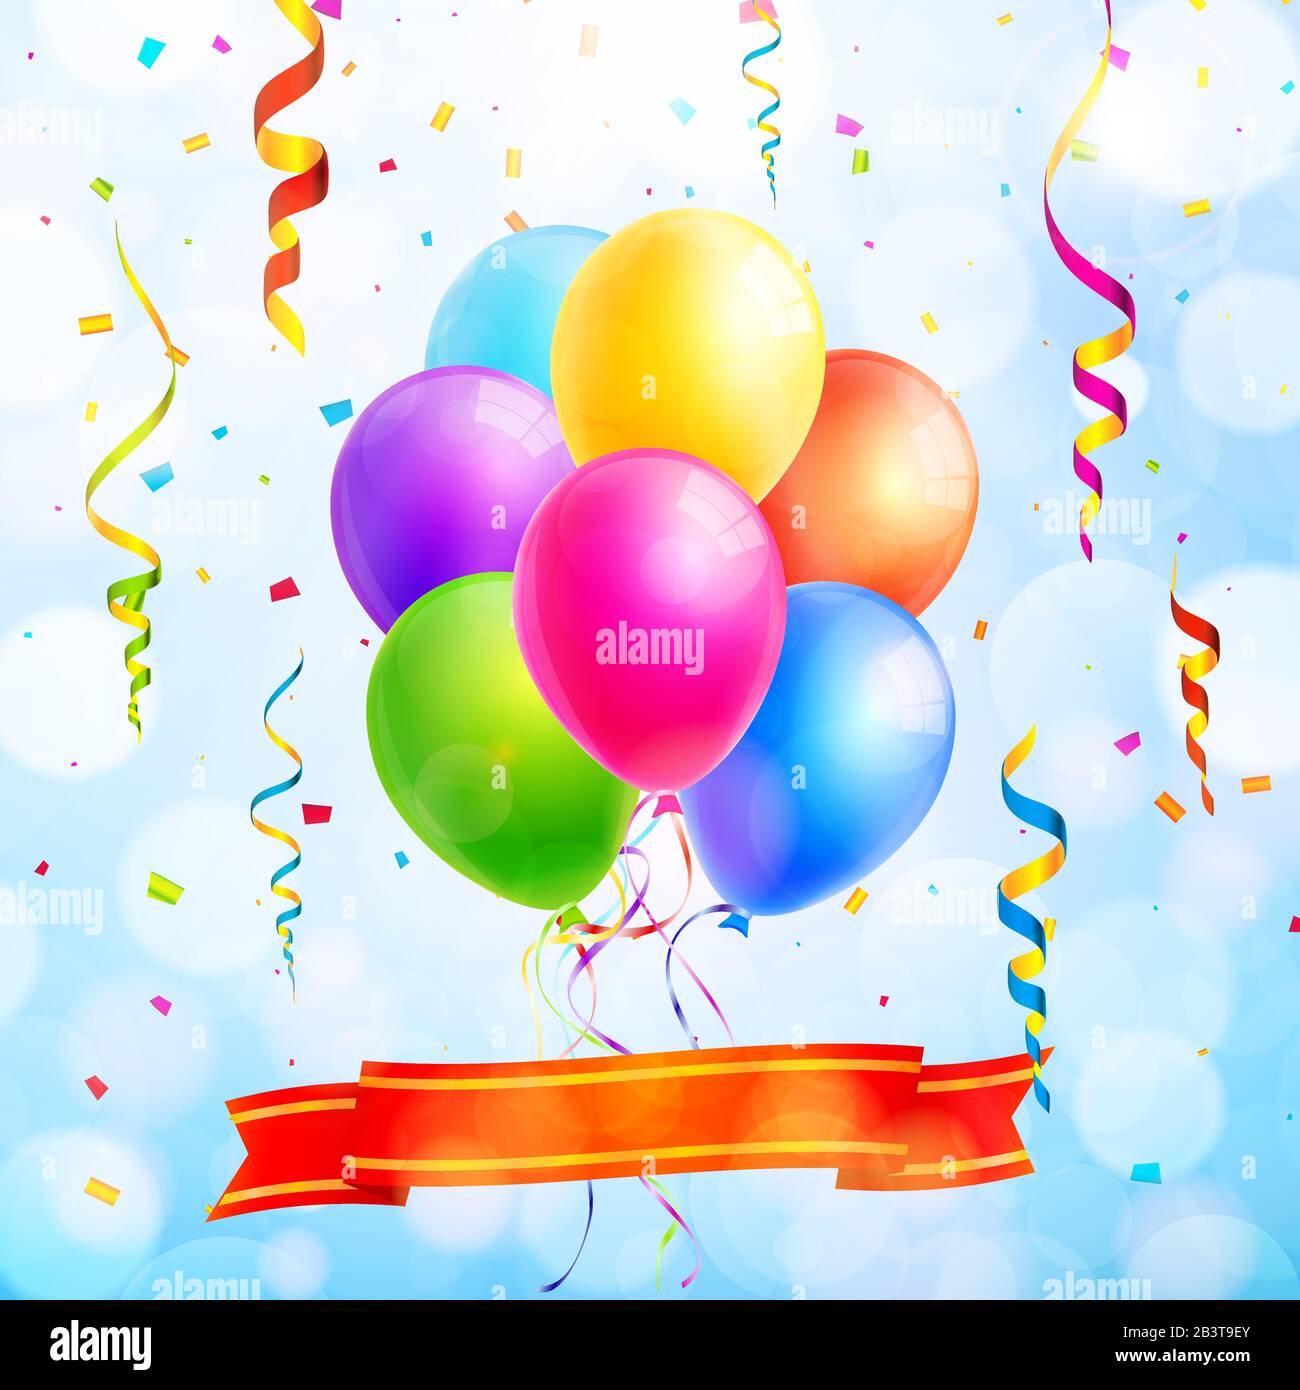 Celebration background with colorful balloons, ribbon, streamers and confetti. Vector illustration Stock Vector